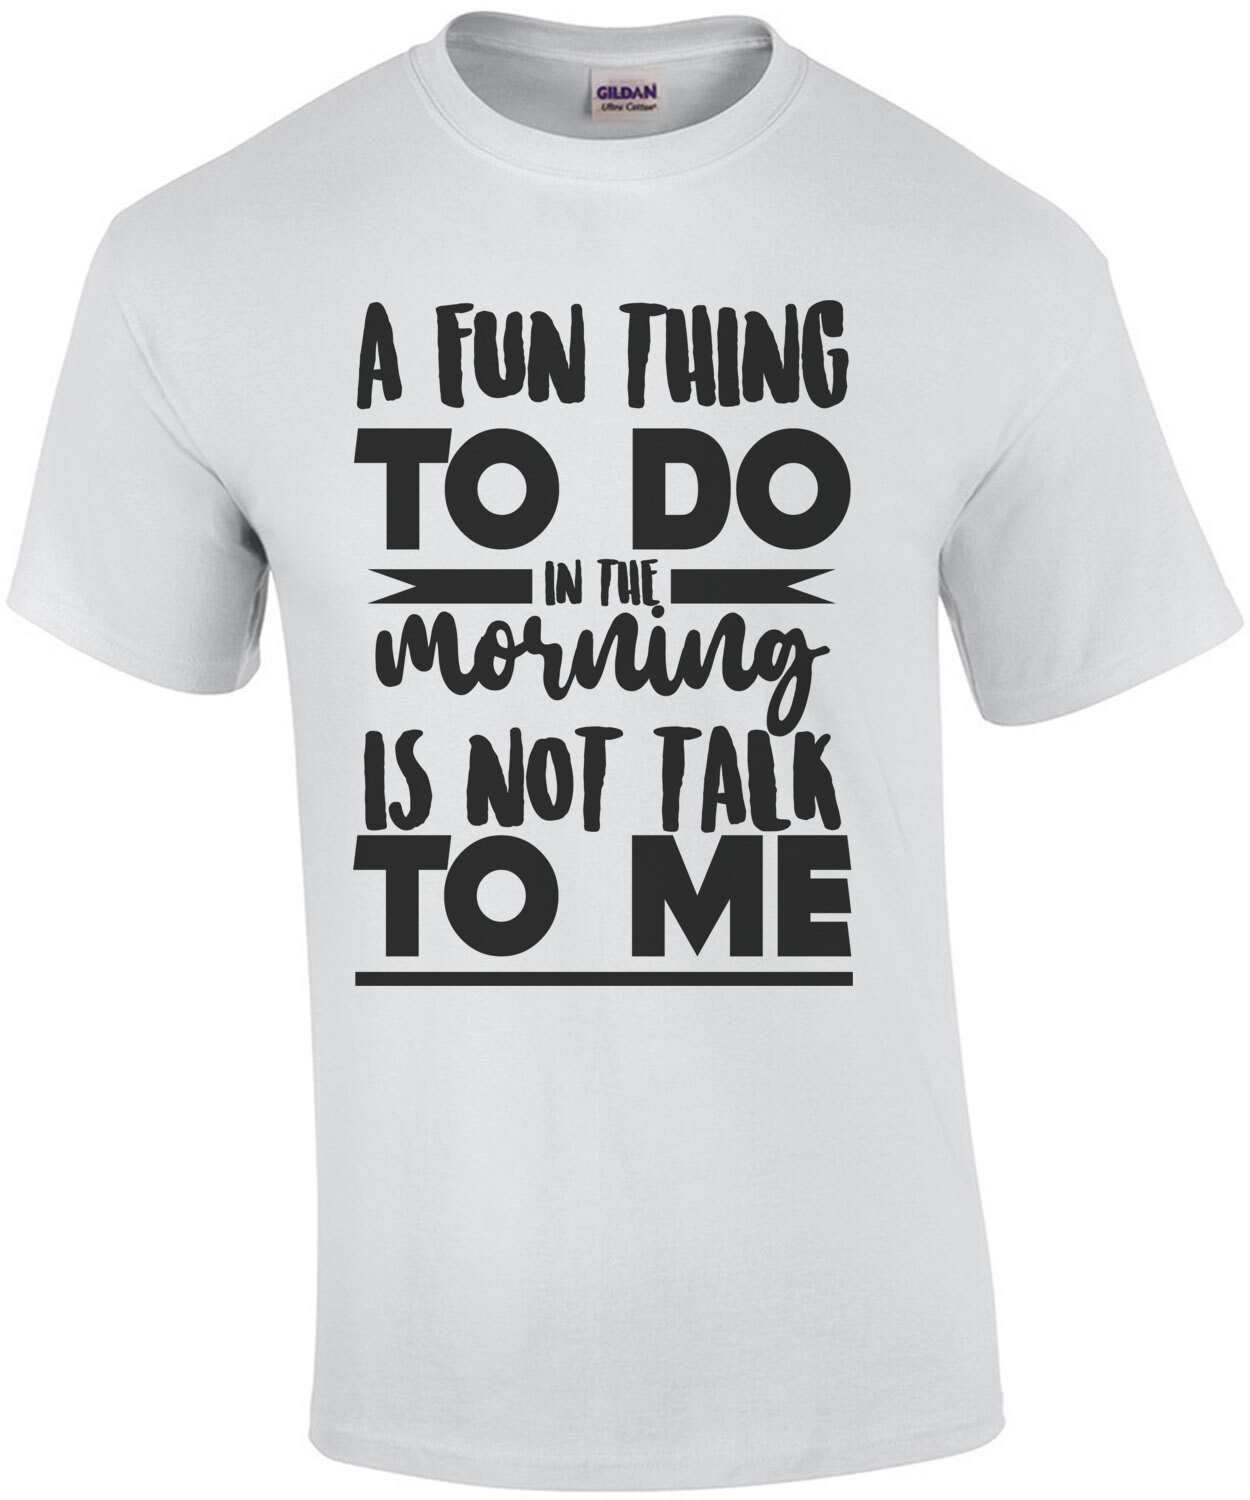 A fun thing to do in the morning is not talk to me - funny office humor - work humor t-shirt